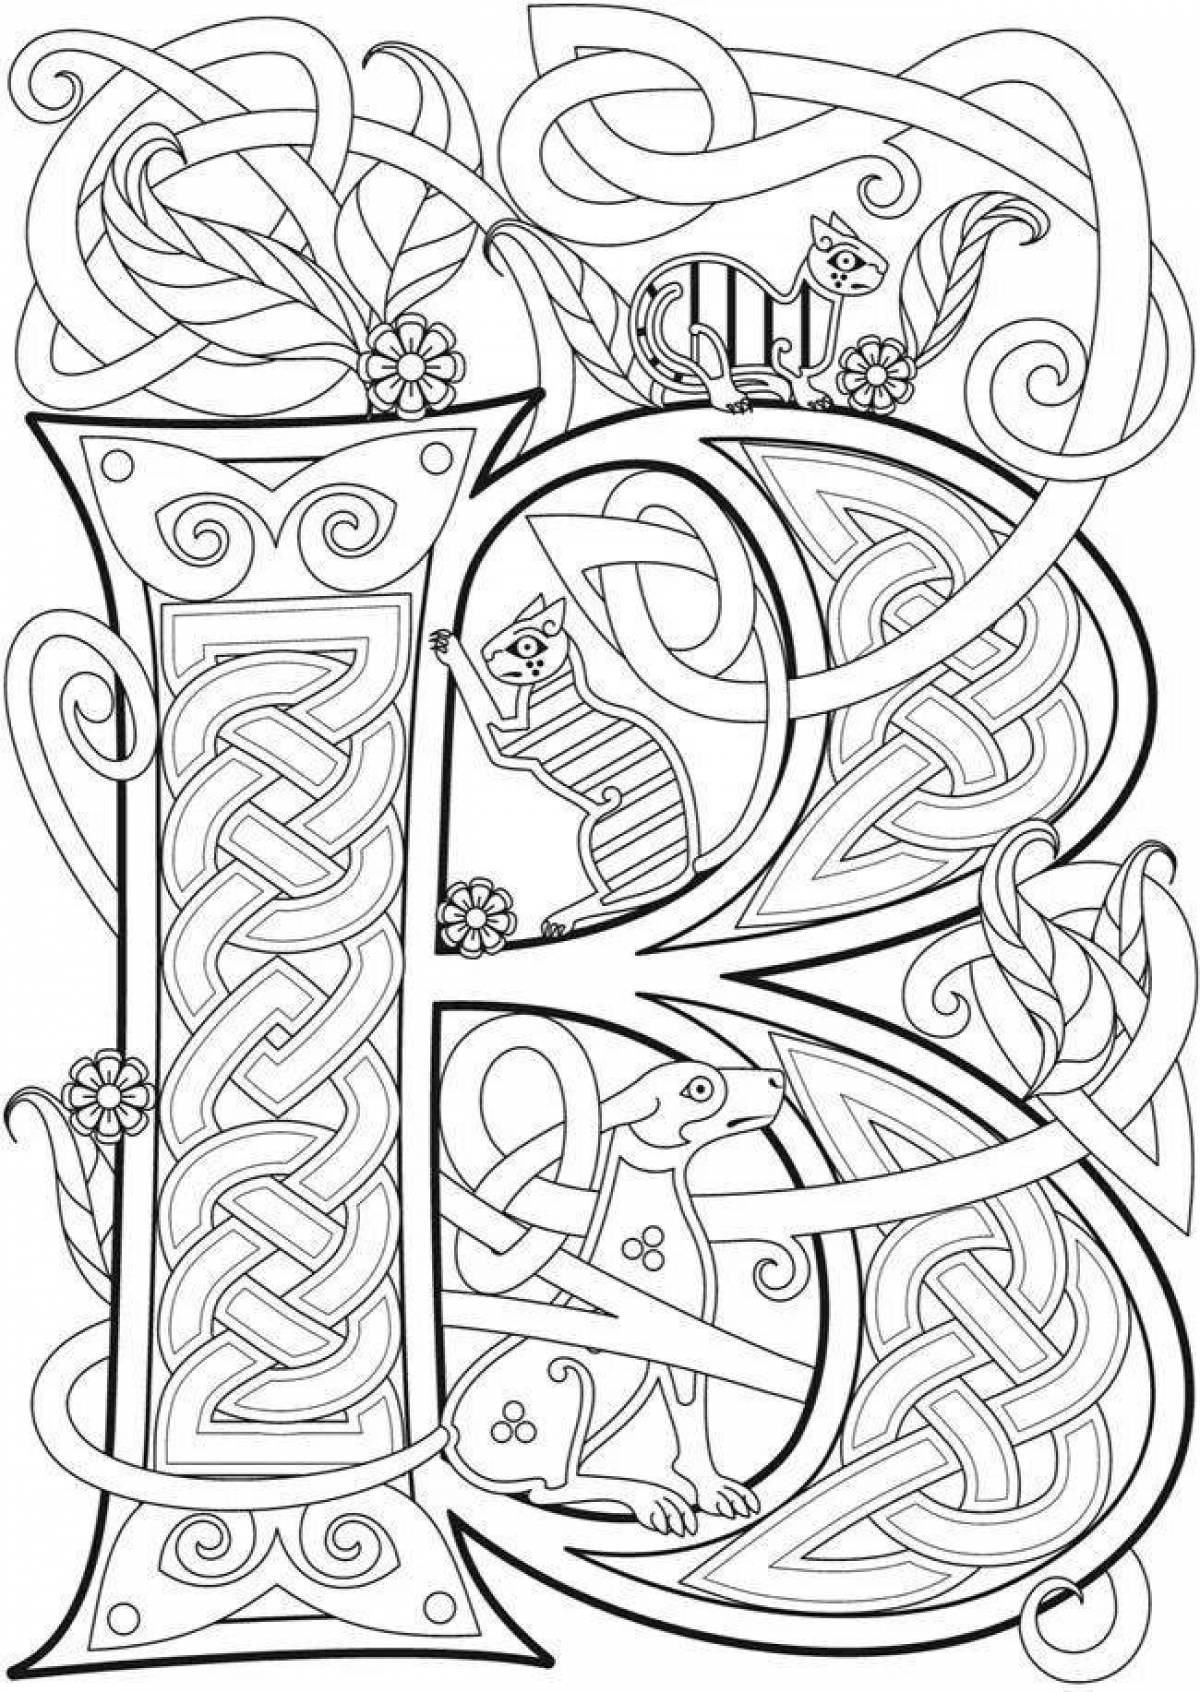 Colorful coloring page initial letter